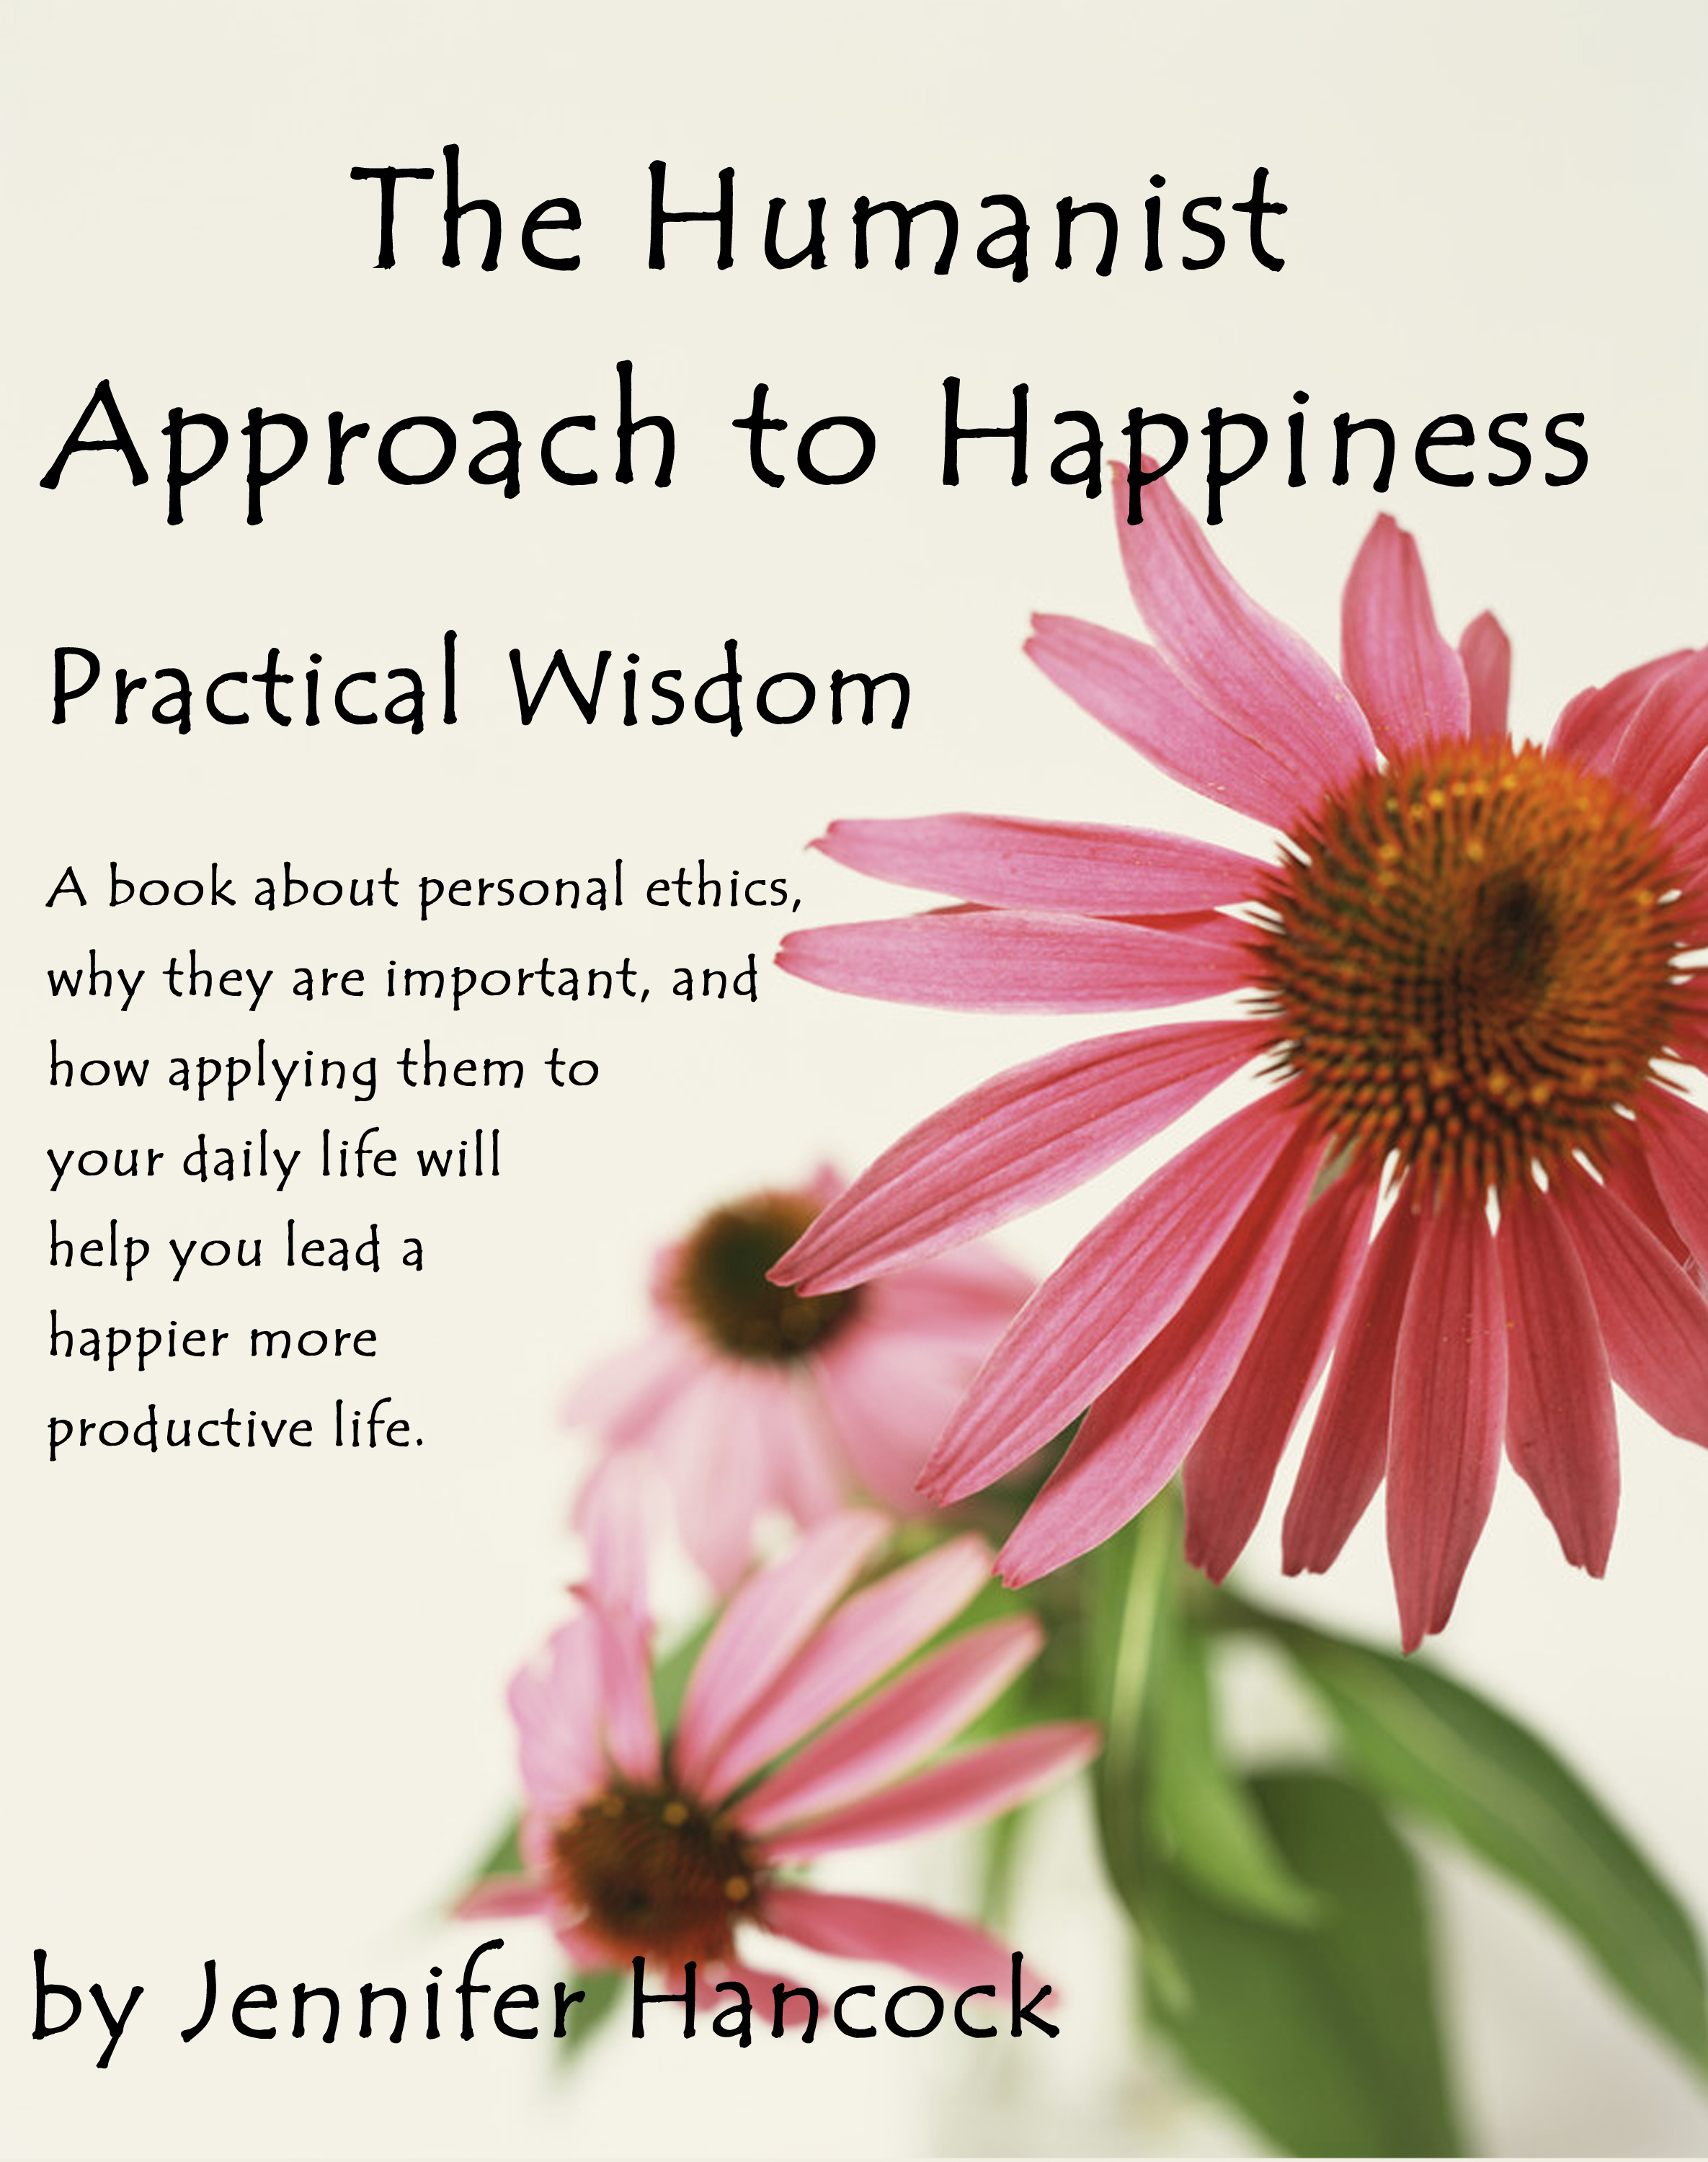 The Humanist Approach to Happiness: Practical Wisdom